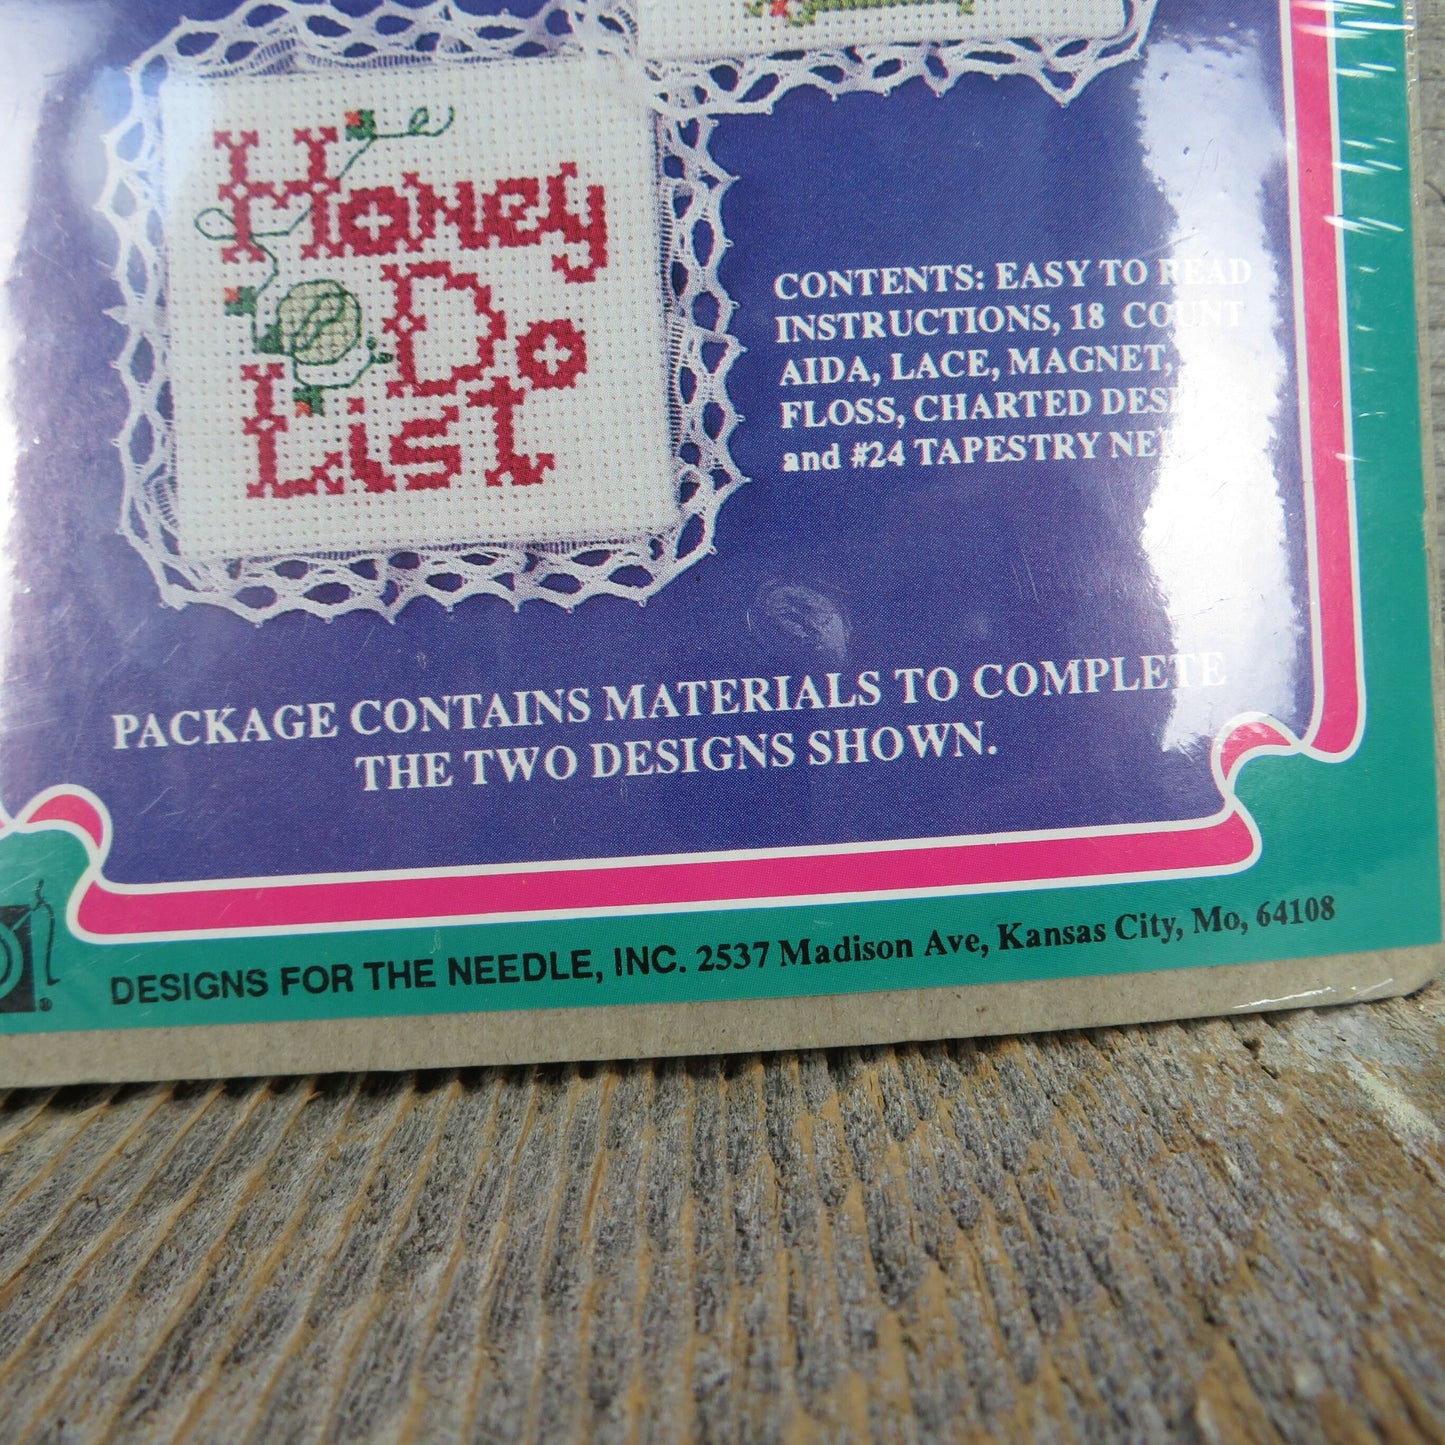 Vintage Cross Stitch Magnet Kit Honey Do List Not Forget Designs for the Needle Inc